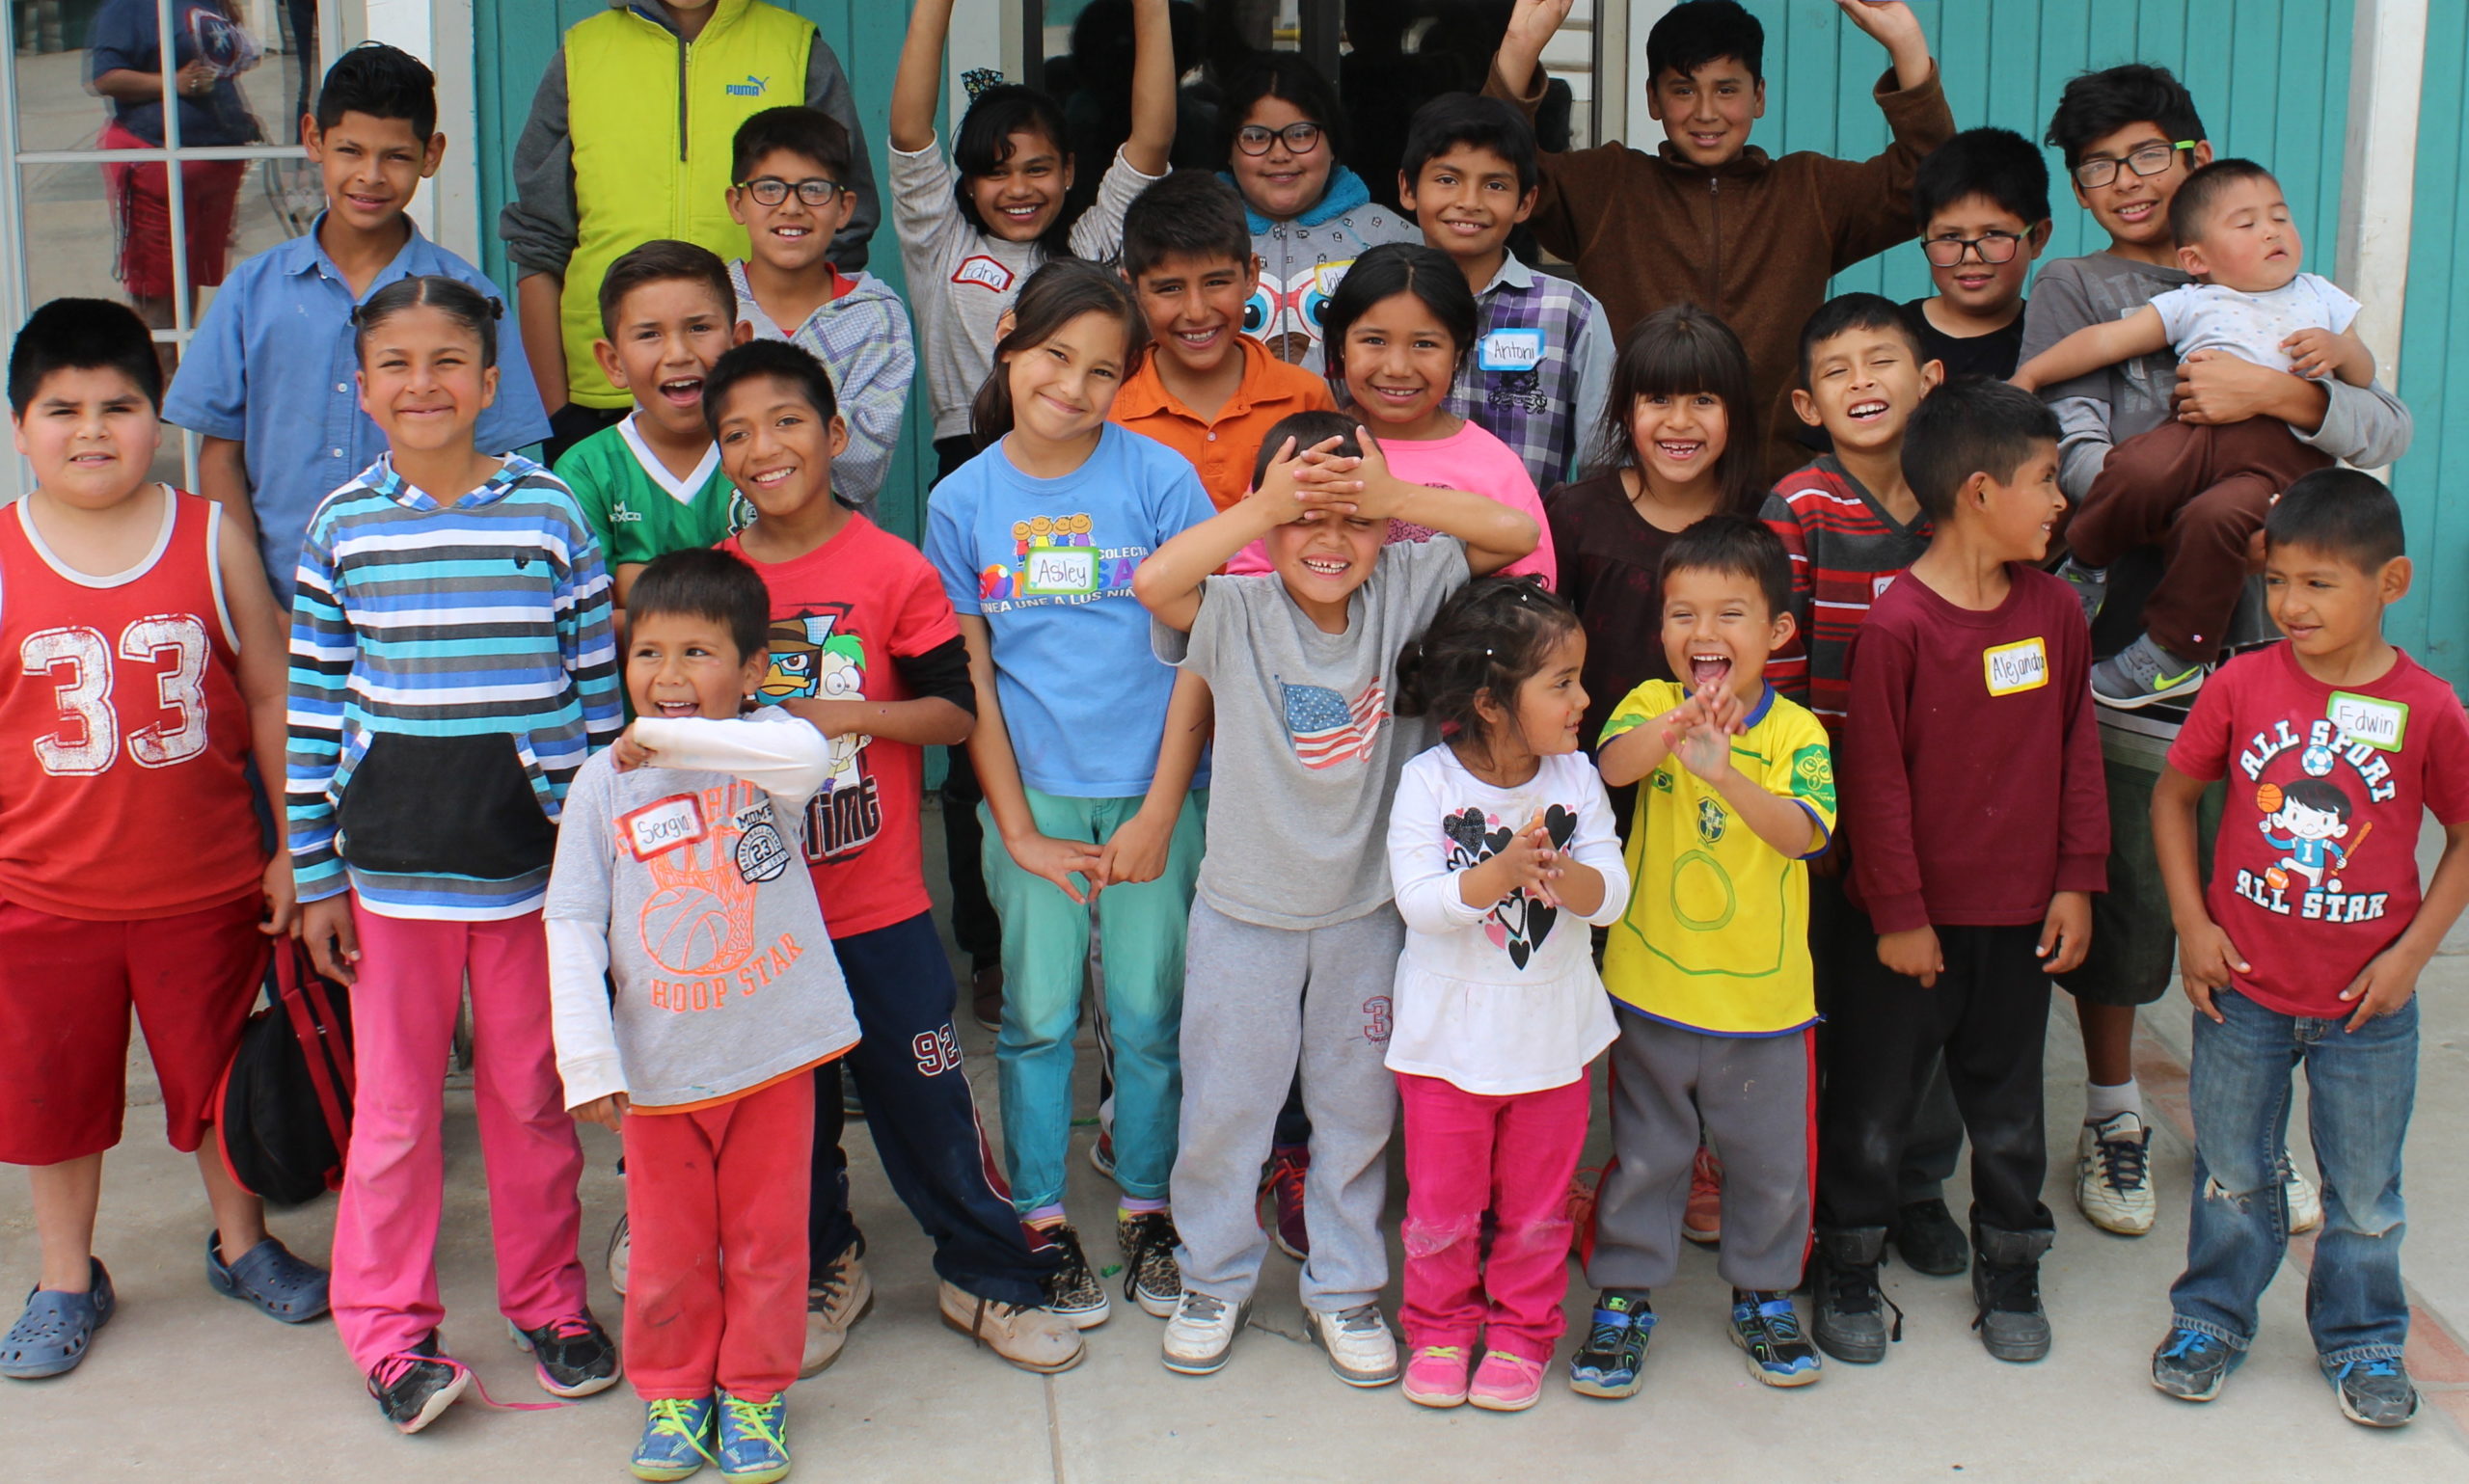 Service trip to Mexico with Unity 4 Orphans